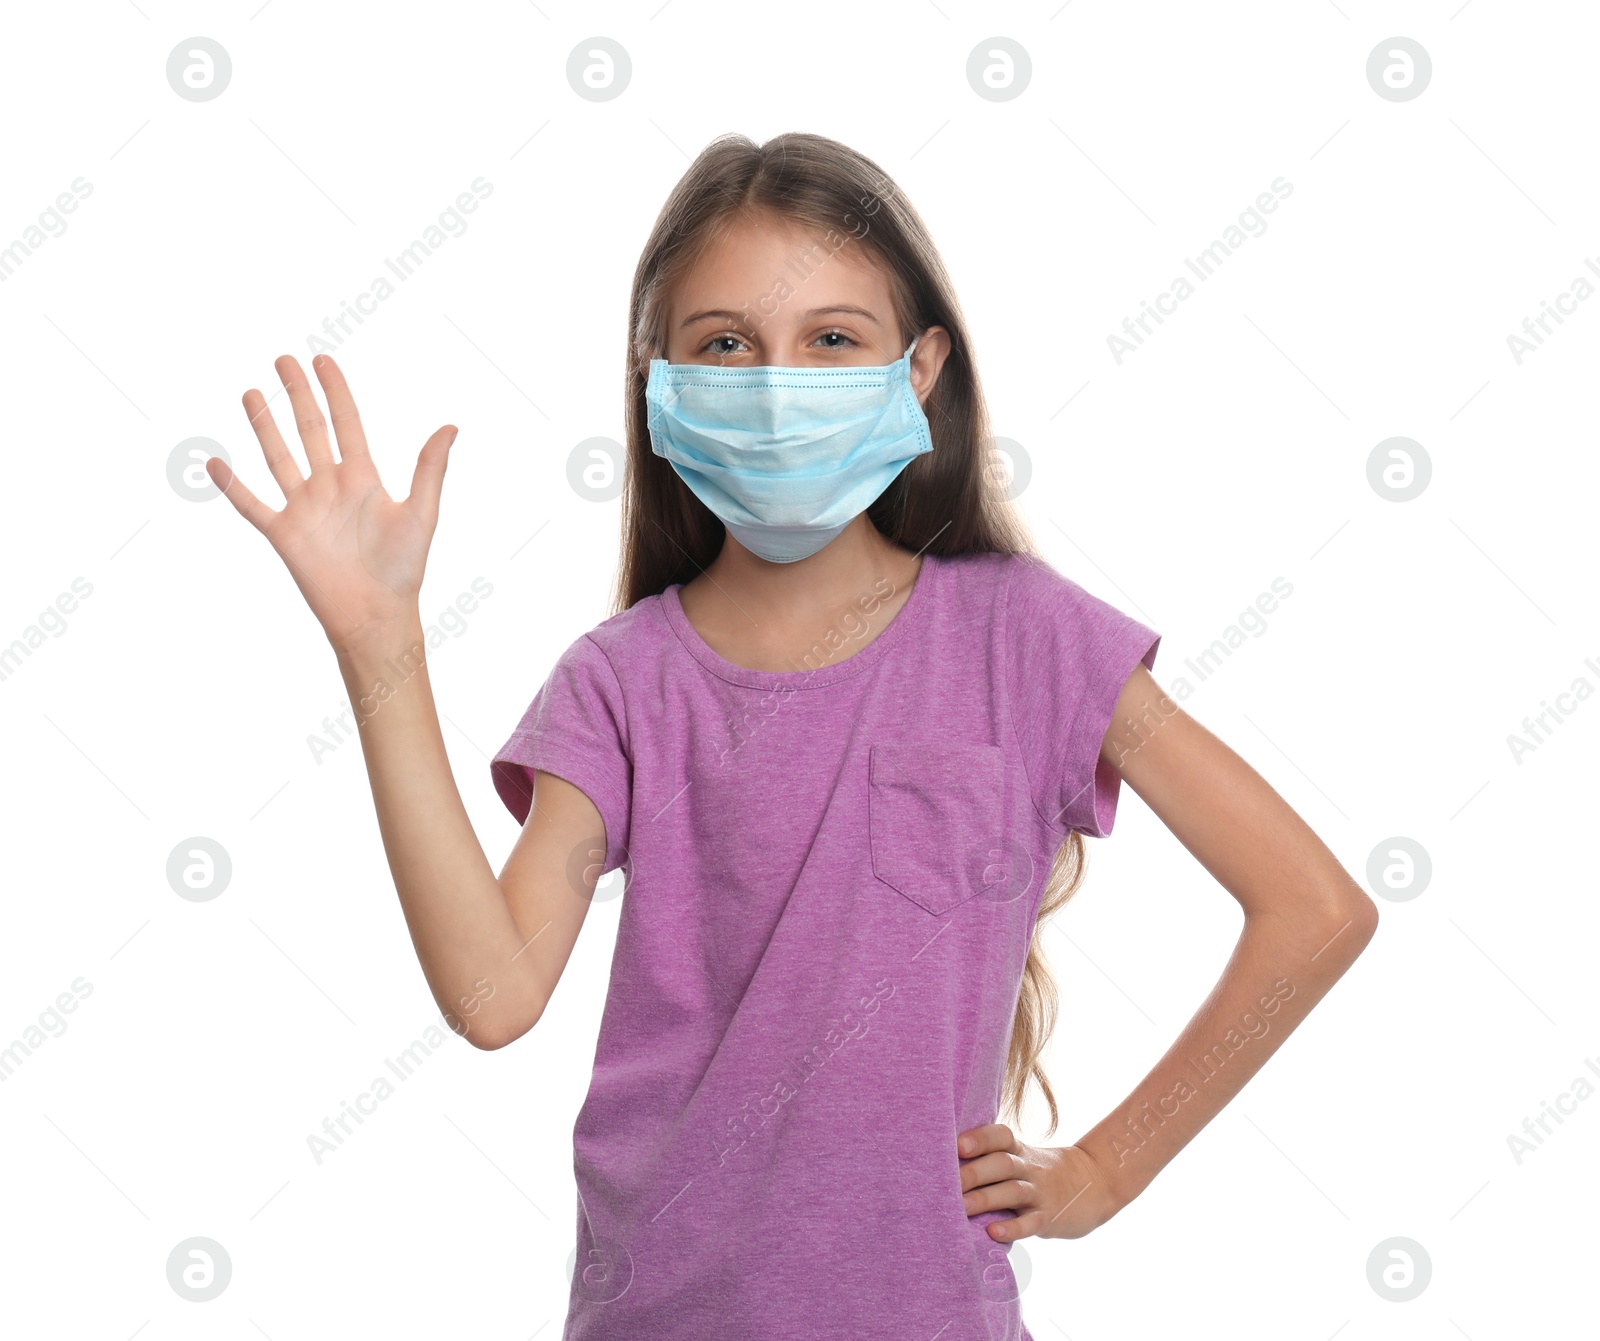 Photo of Little girl in protective mask showing hello gesture on white background. Keeping social distance during coronavirus pandemic